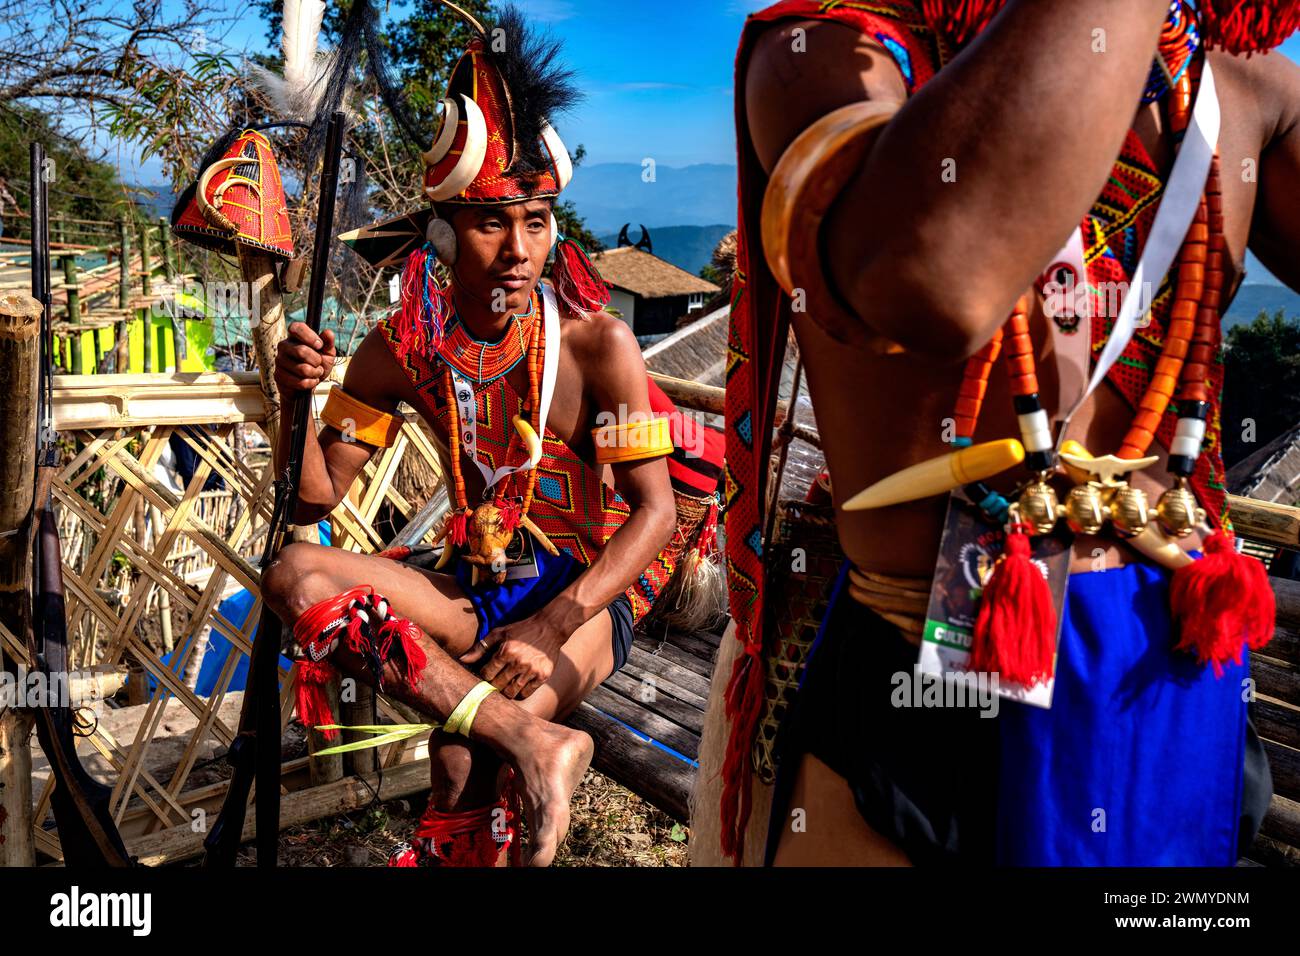 India, Nagaland, Kohima, annual meeting of all the Naga tribes during the Hornbill Festival, Konyak Tribe Stock Photo